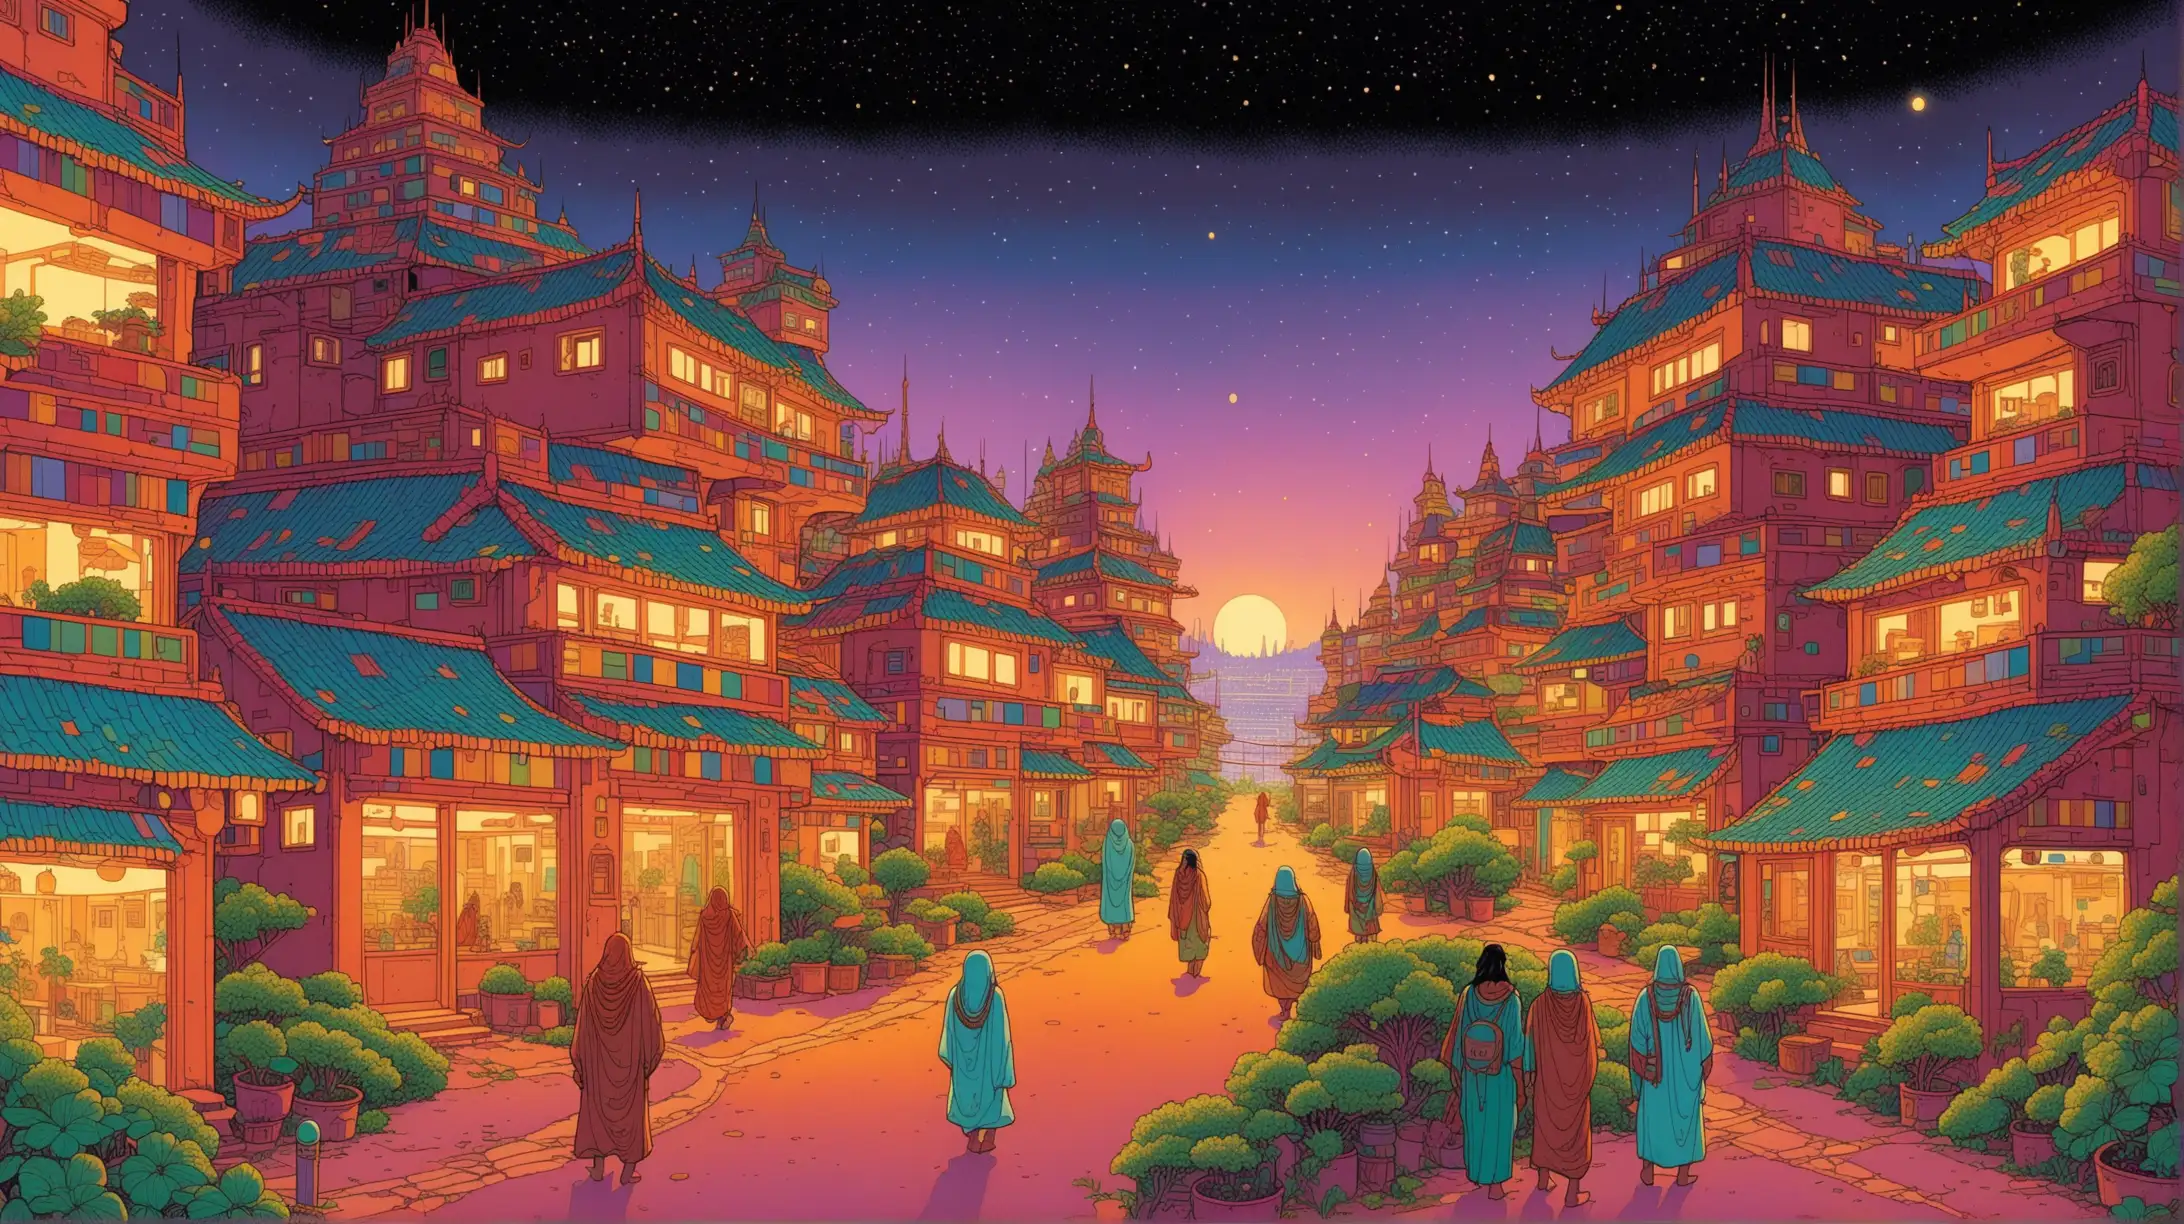 Serene Alien City in a Magical Garden Embroidered Night Scene by Moebius